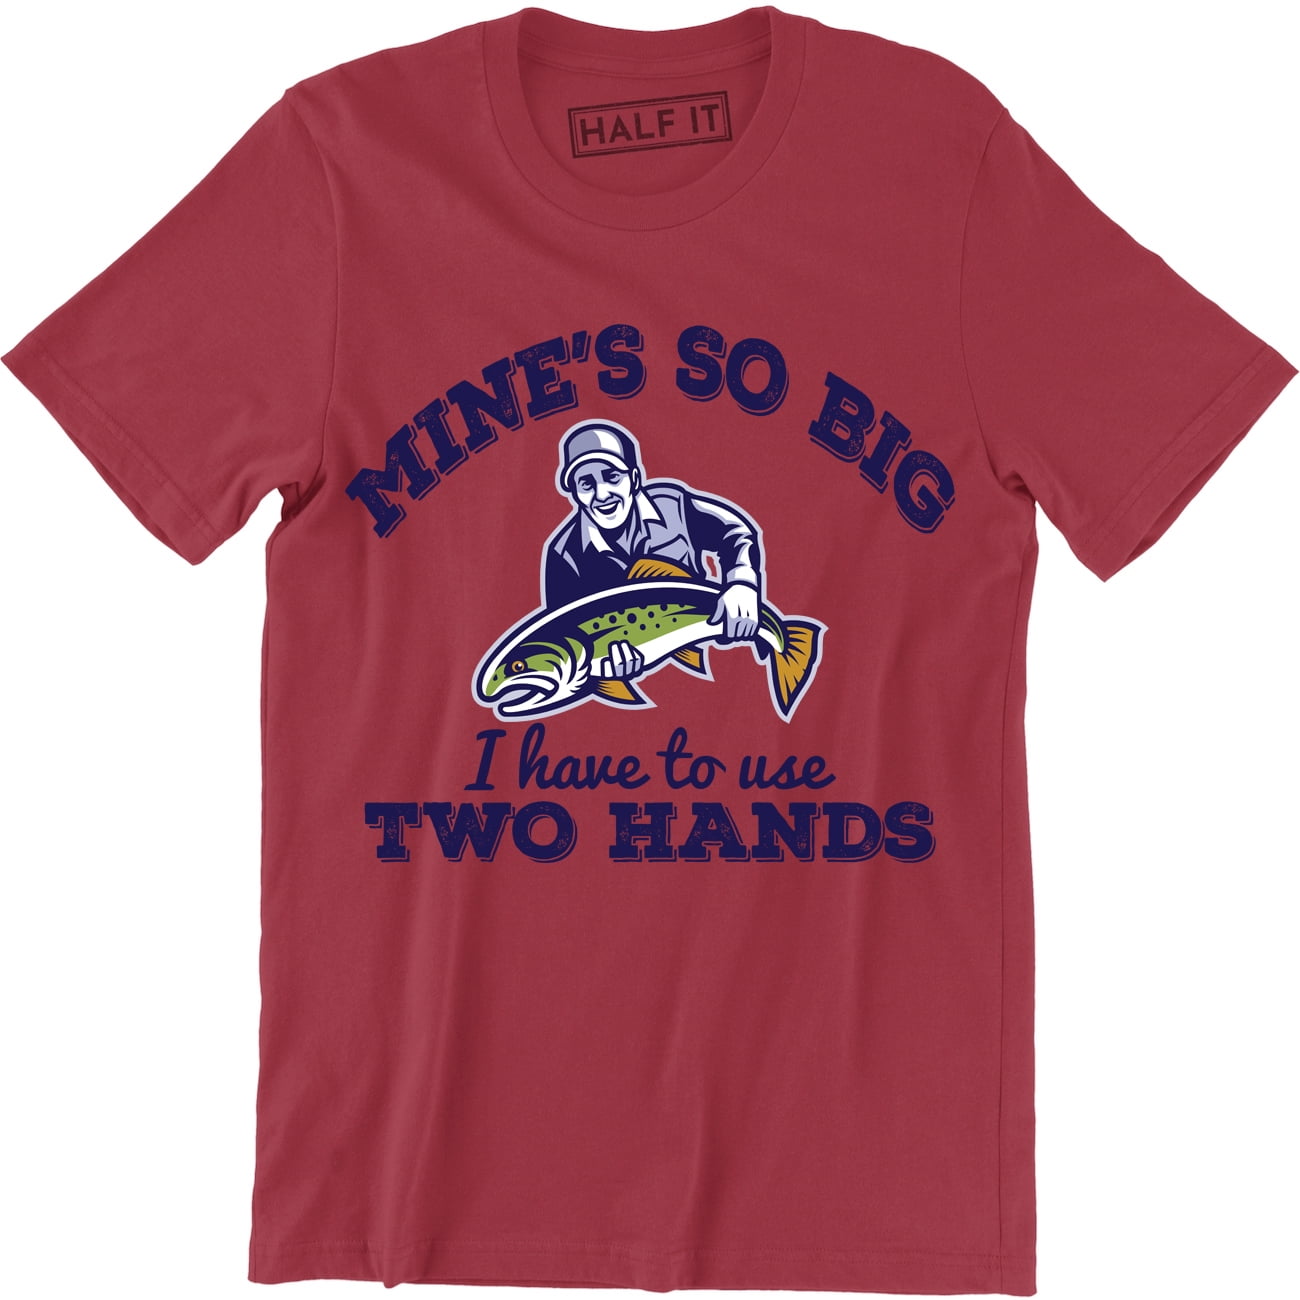 Mine's So Big I Have To Use Two Hands Funny Fishing Men's T-Shirt